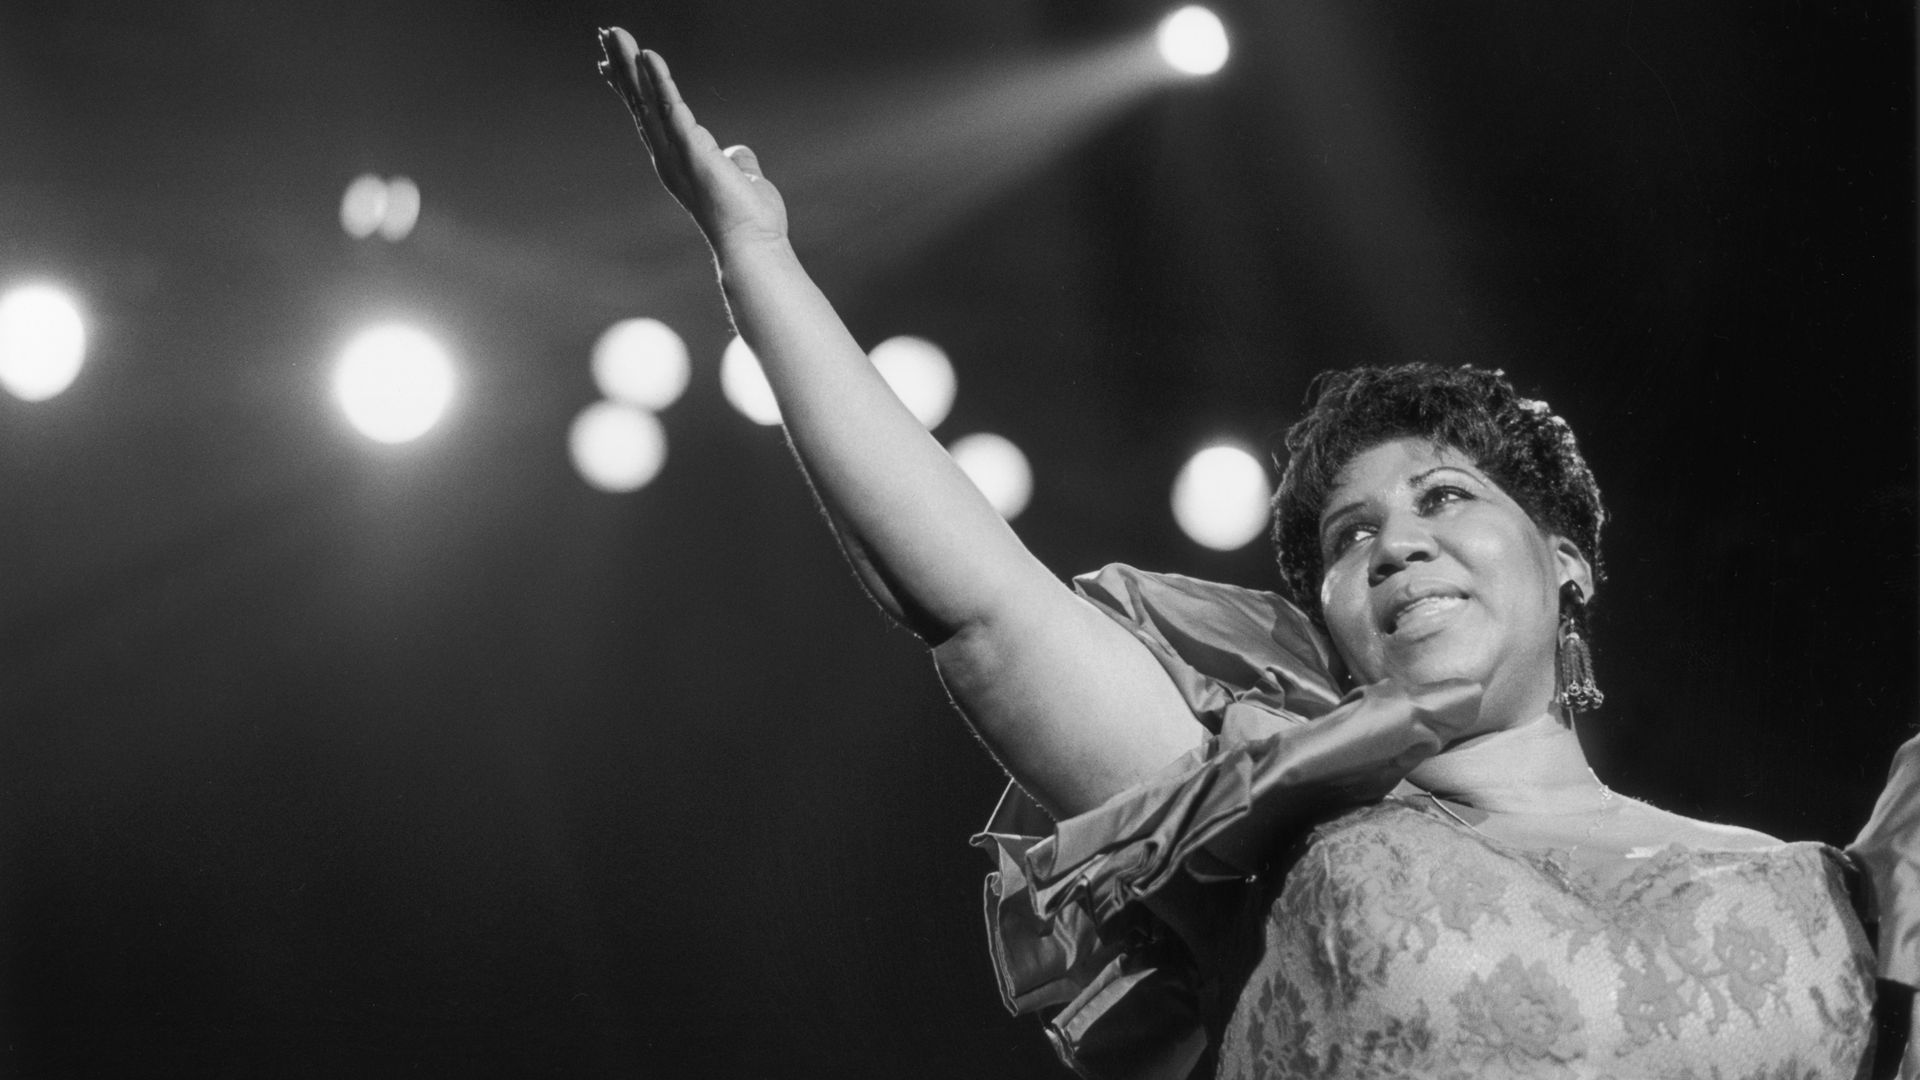 Aretha Franklin, Wallpapers, Backgrounds, Iconic singer, 1920x1080 Full HD Desktop